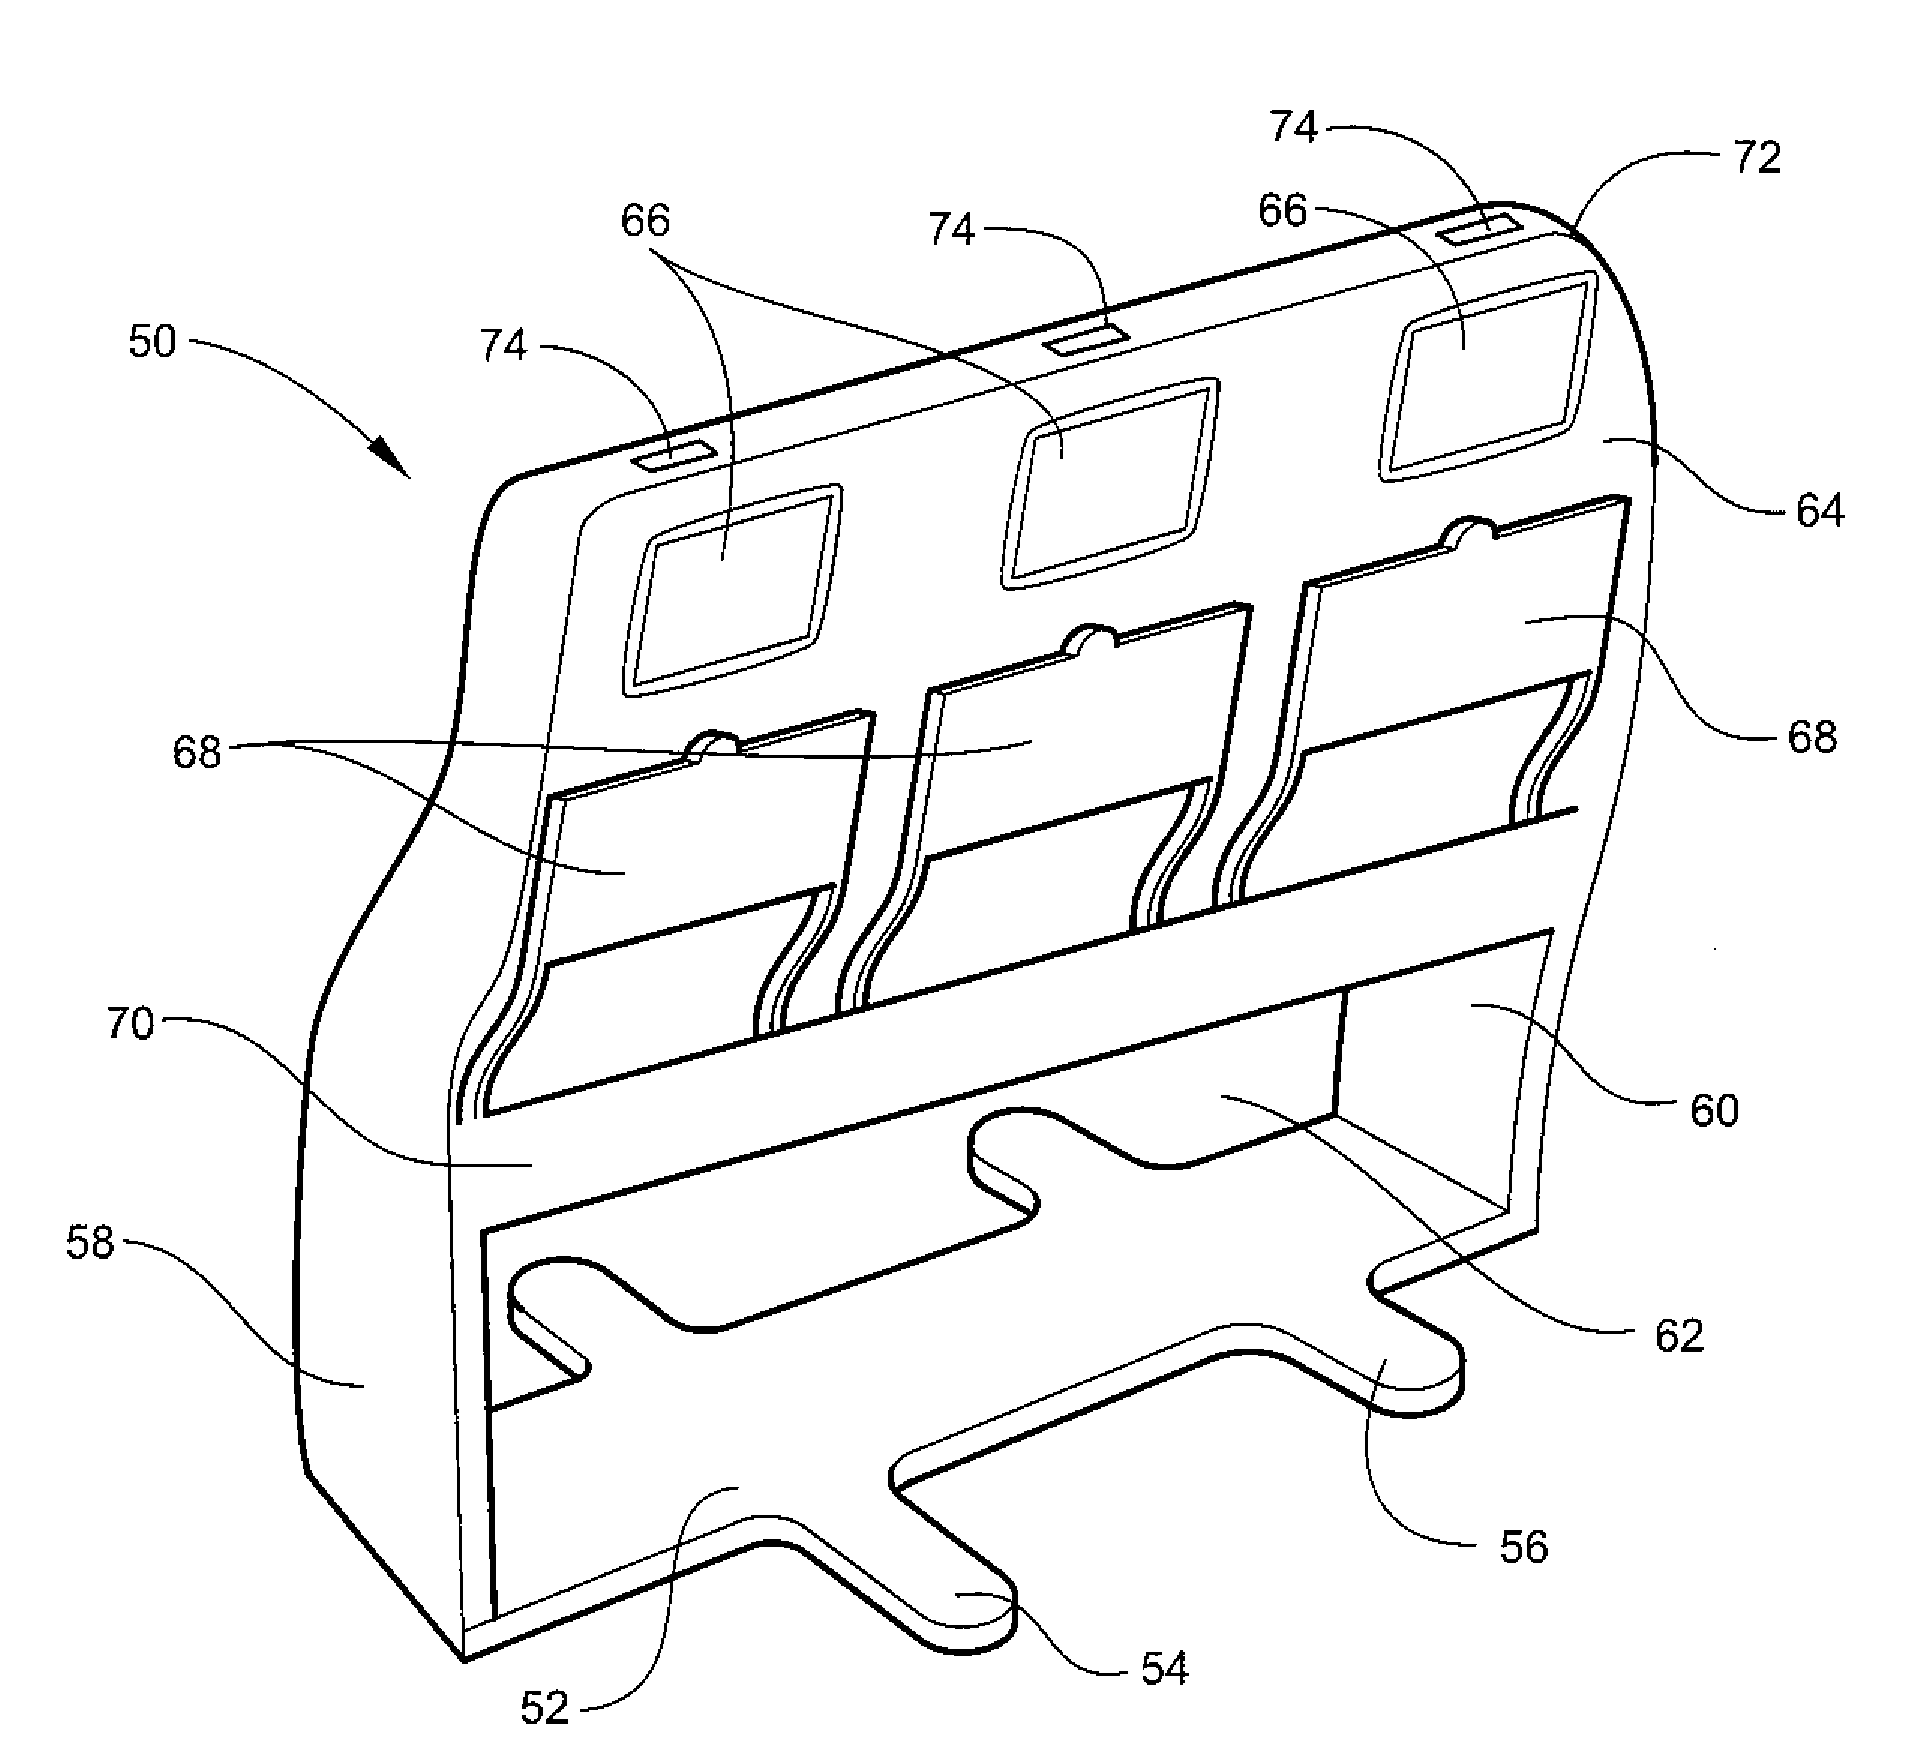 Class divider for aircraft cabin